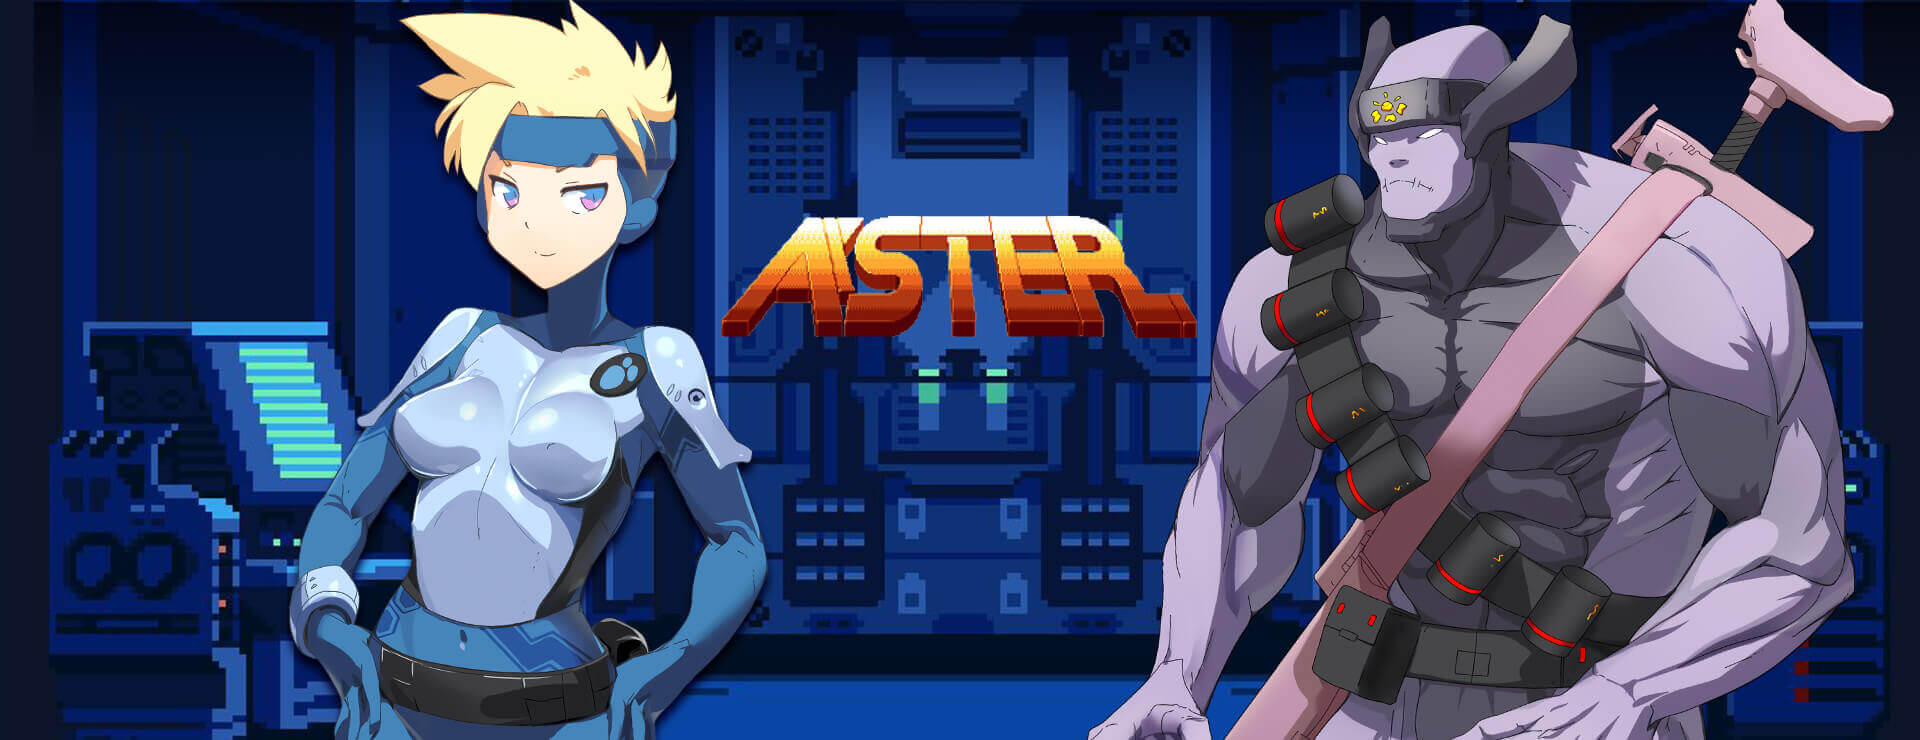 Aster - Action Adventure Game